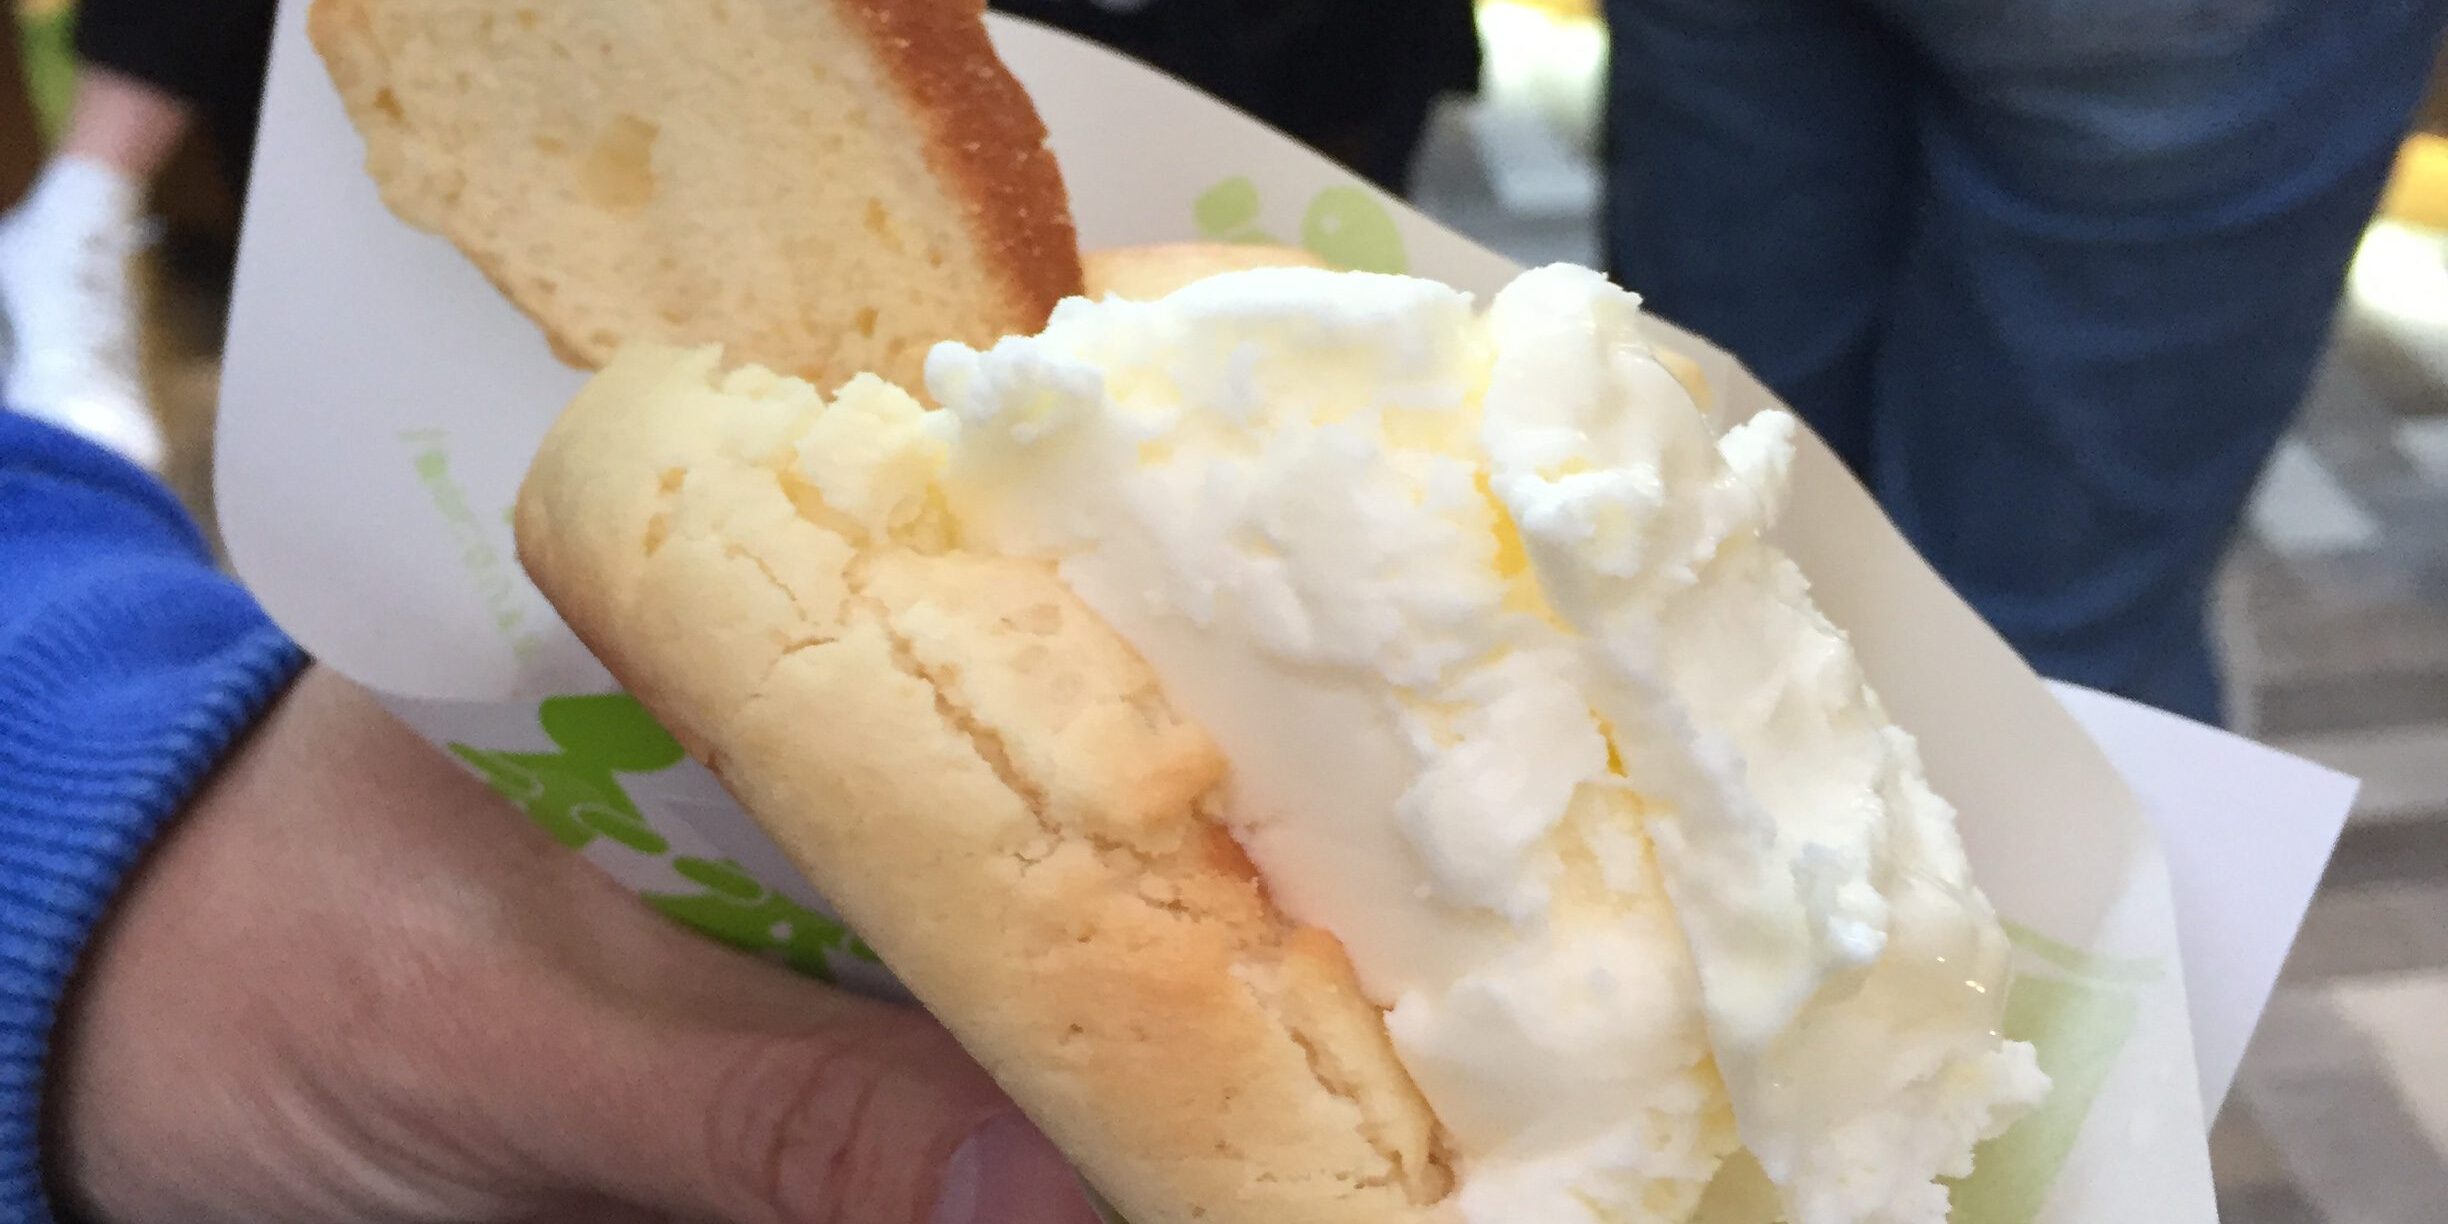 Freshly baked hot bread with ice cream! Yum!